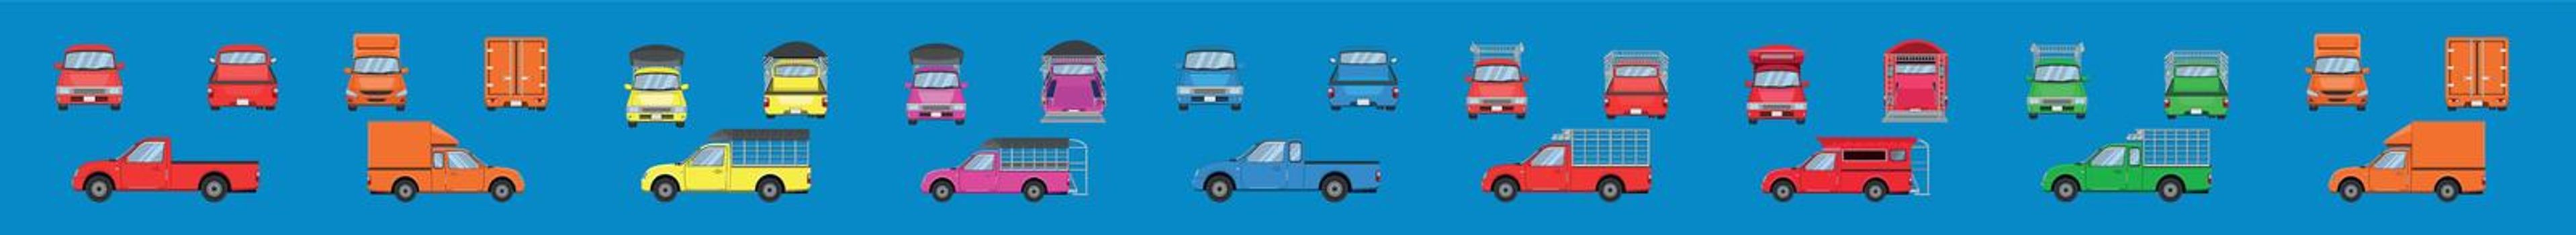 set of pick up car thailand style. vector illustration eps10